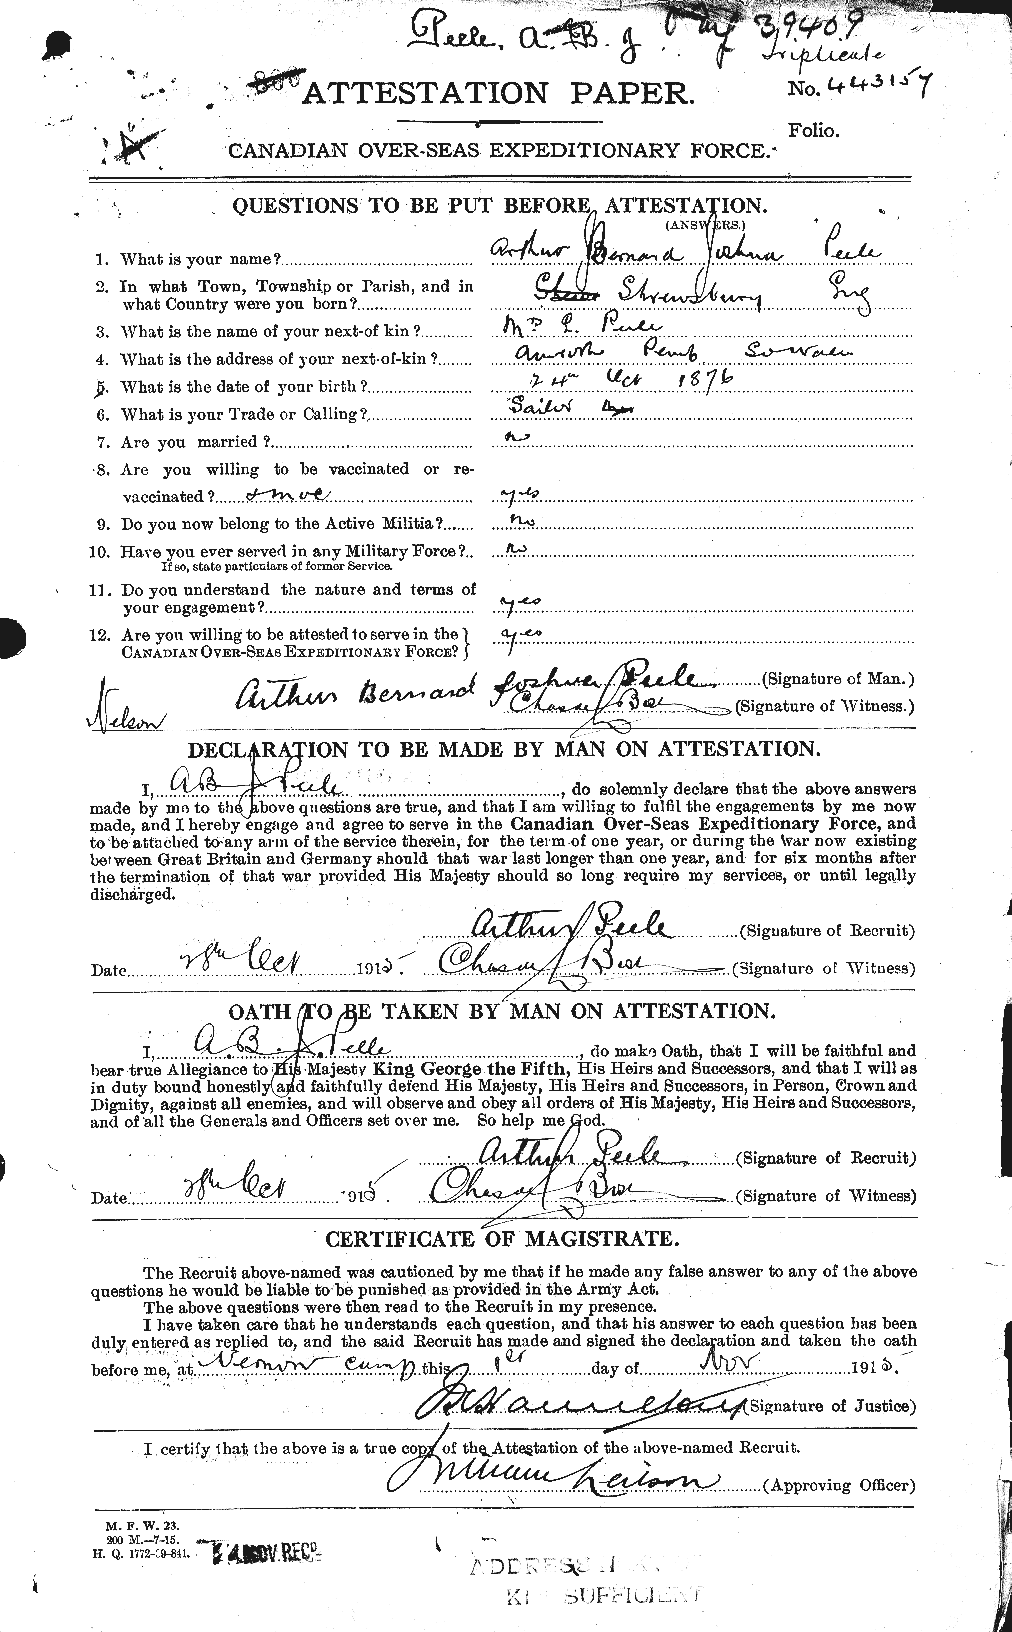 Personnel Records of the First World War - CEF 571864a